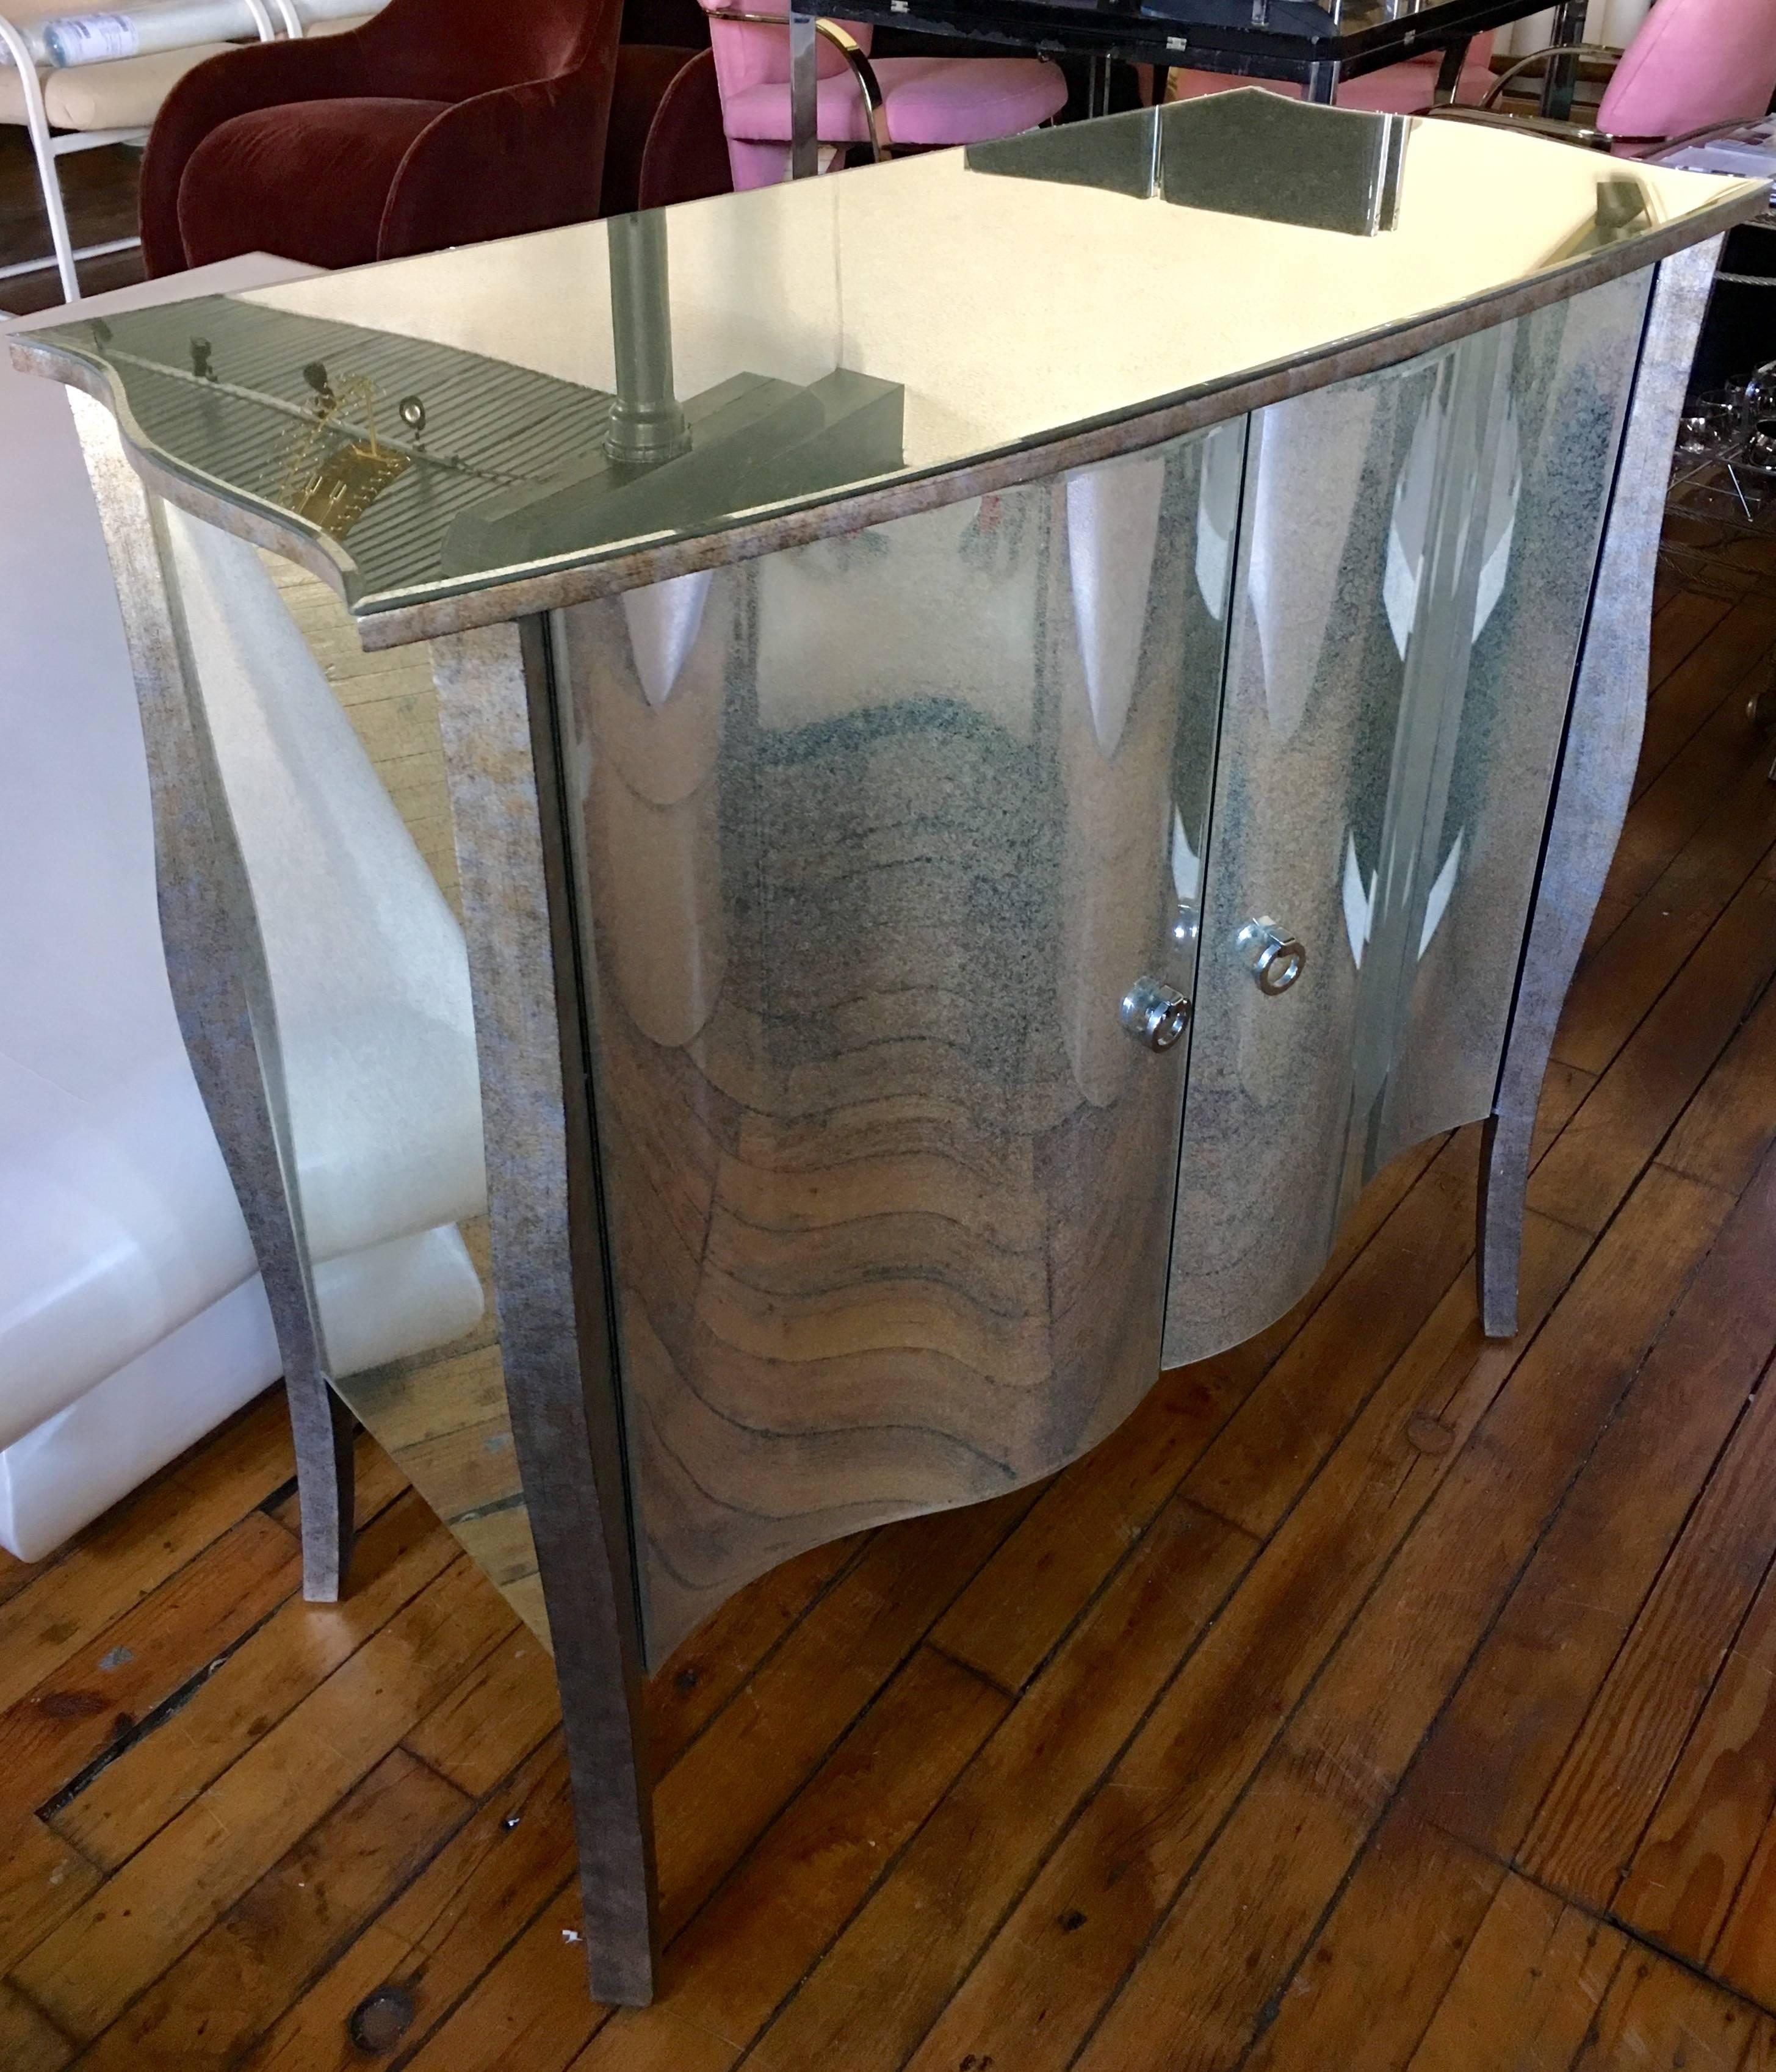 Glamorous Hollywood Regency style antiqued aged mirrored glass two-door chest featuring Polychromed wood, nickeled brass hardware and sculptural curved front doors. This versatile piece could be used as a bar cabinet, hall chest or dining sideboard.